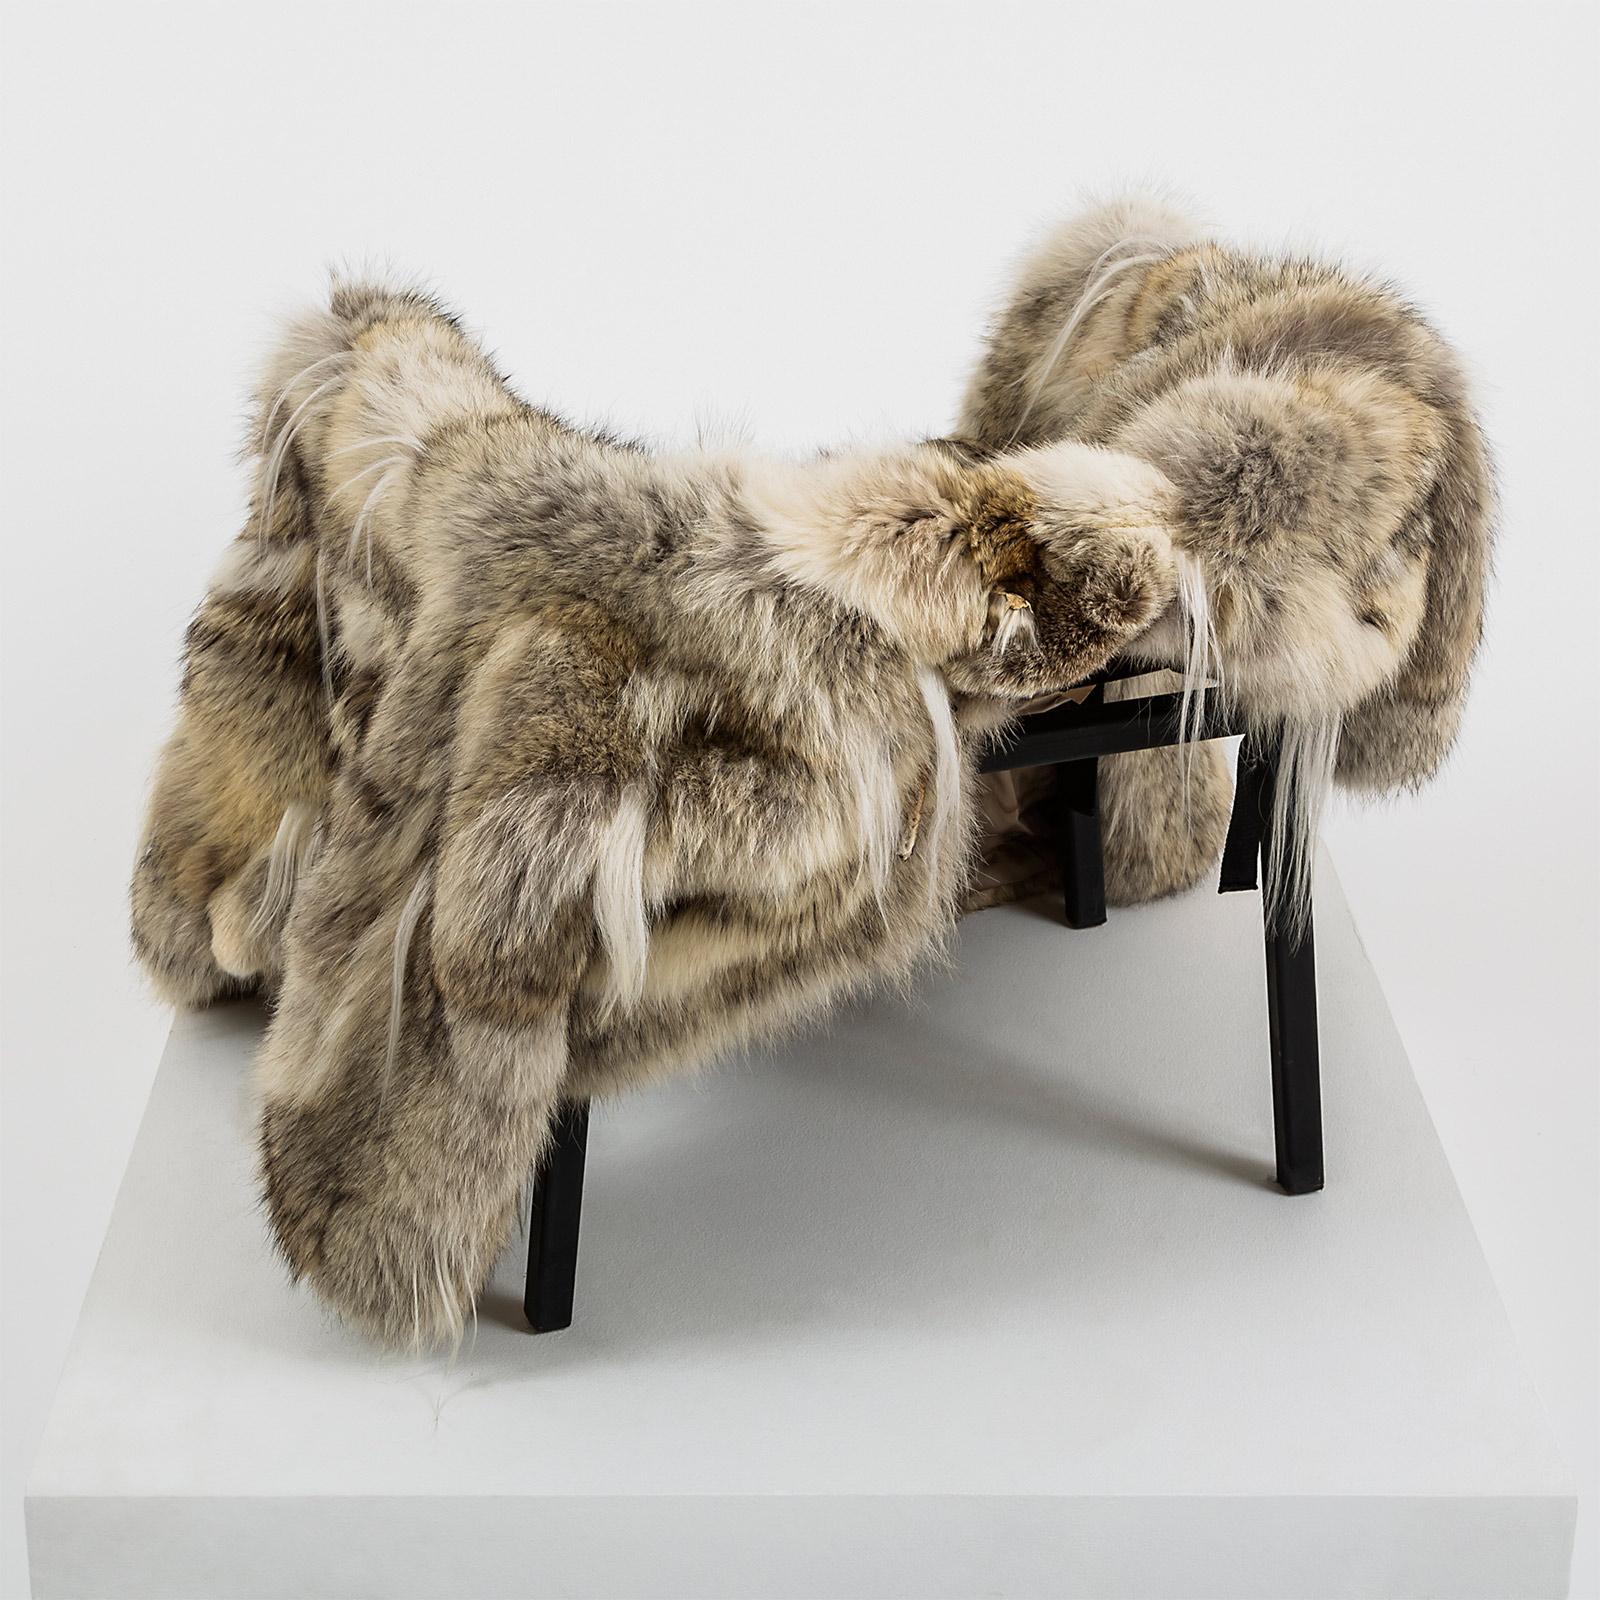 A black steel chair frame. A fur coat (wolf, goat) in size M/ L. The coat has straps attached to convert it into a seat, thus making the chair functional and complete.

Materials: Steel chair frame and fur coat
Edition: Unique piece
Year of